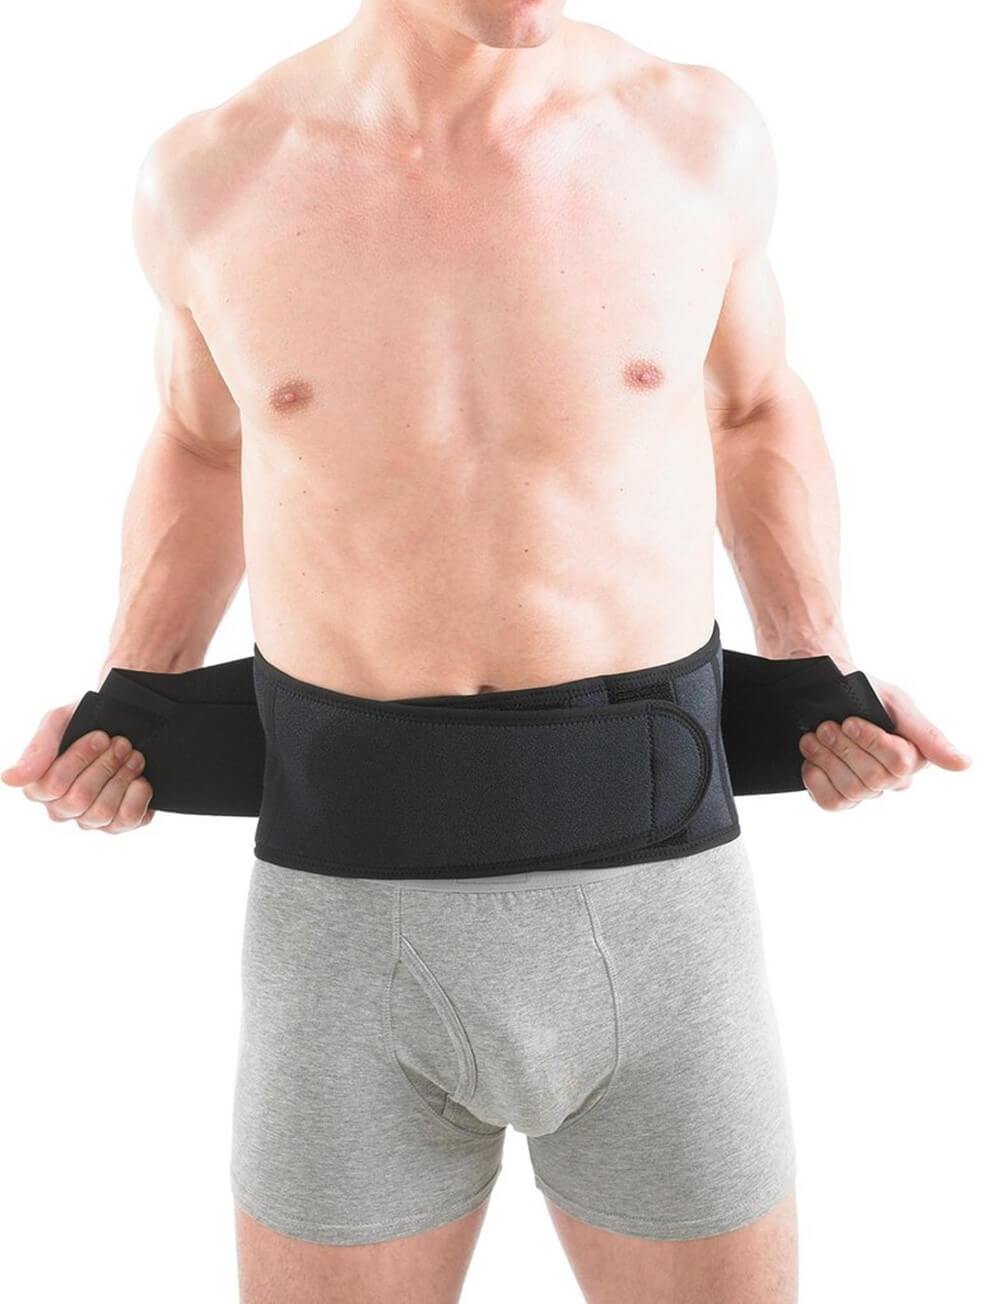 lower back injury pain support